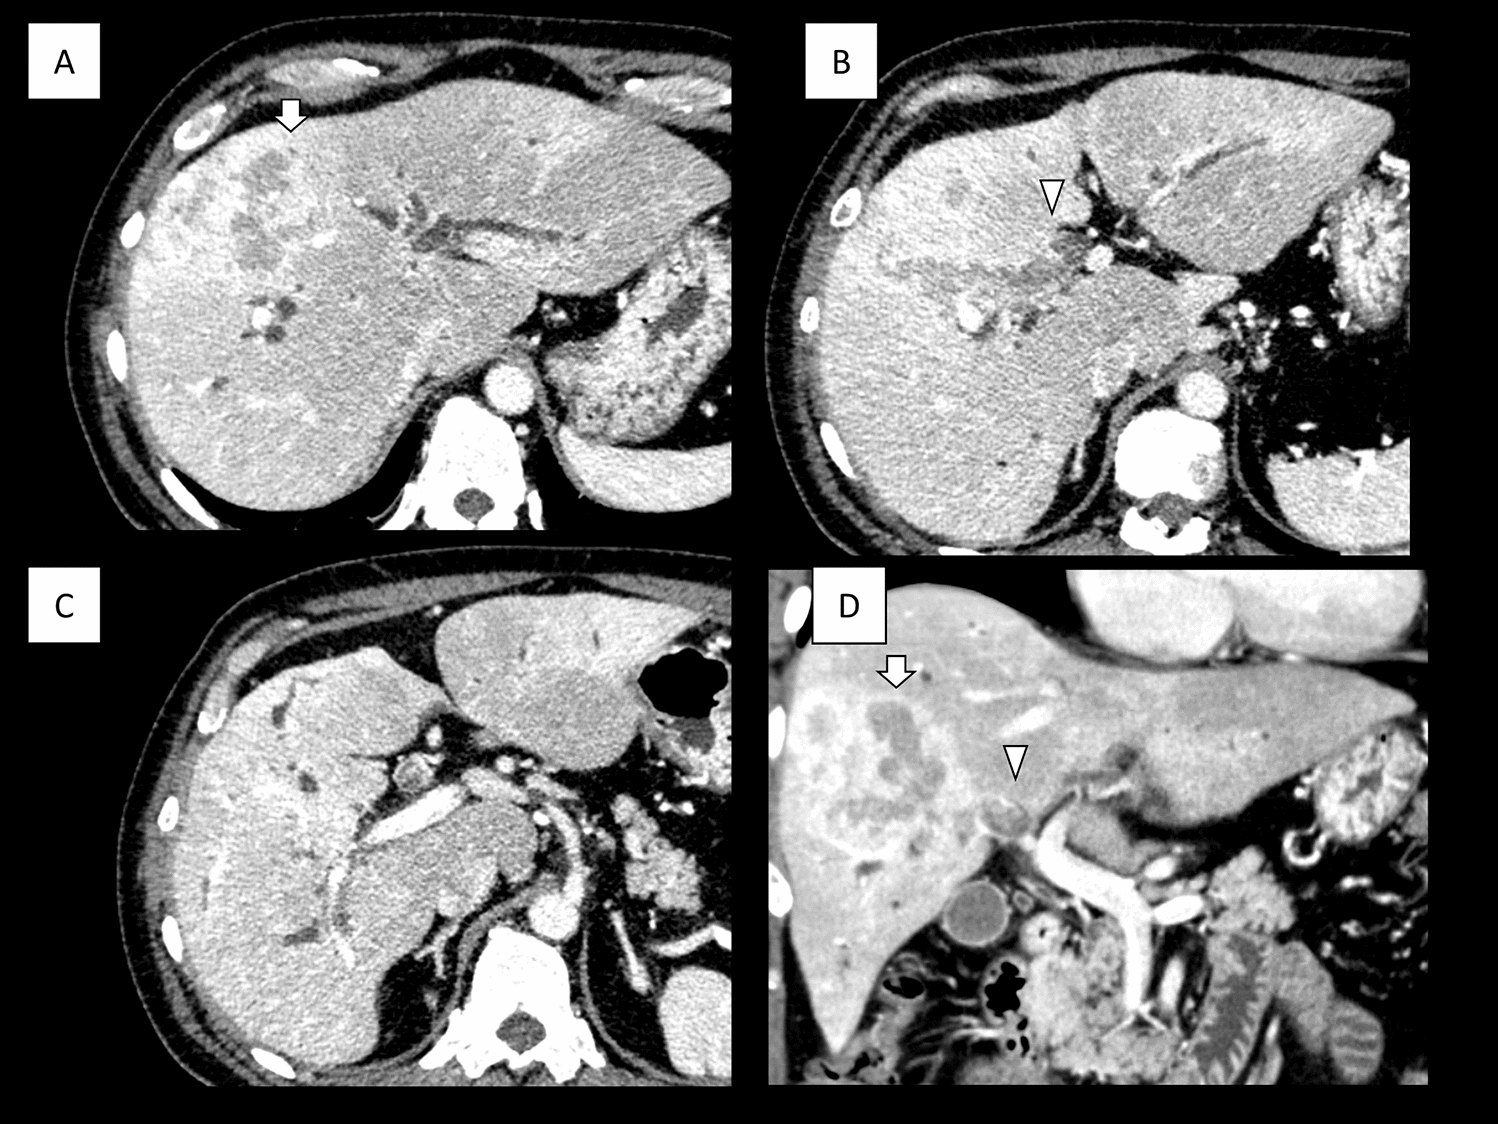 Successful intrahepatic cholangiocarcinoma conversion surgery after administration of fibroblast growth factor receptor inhibitor